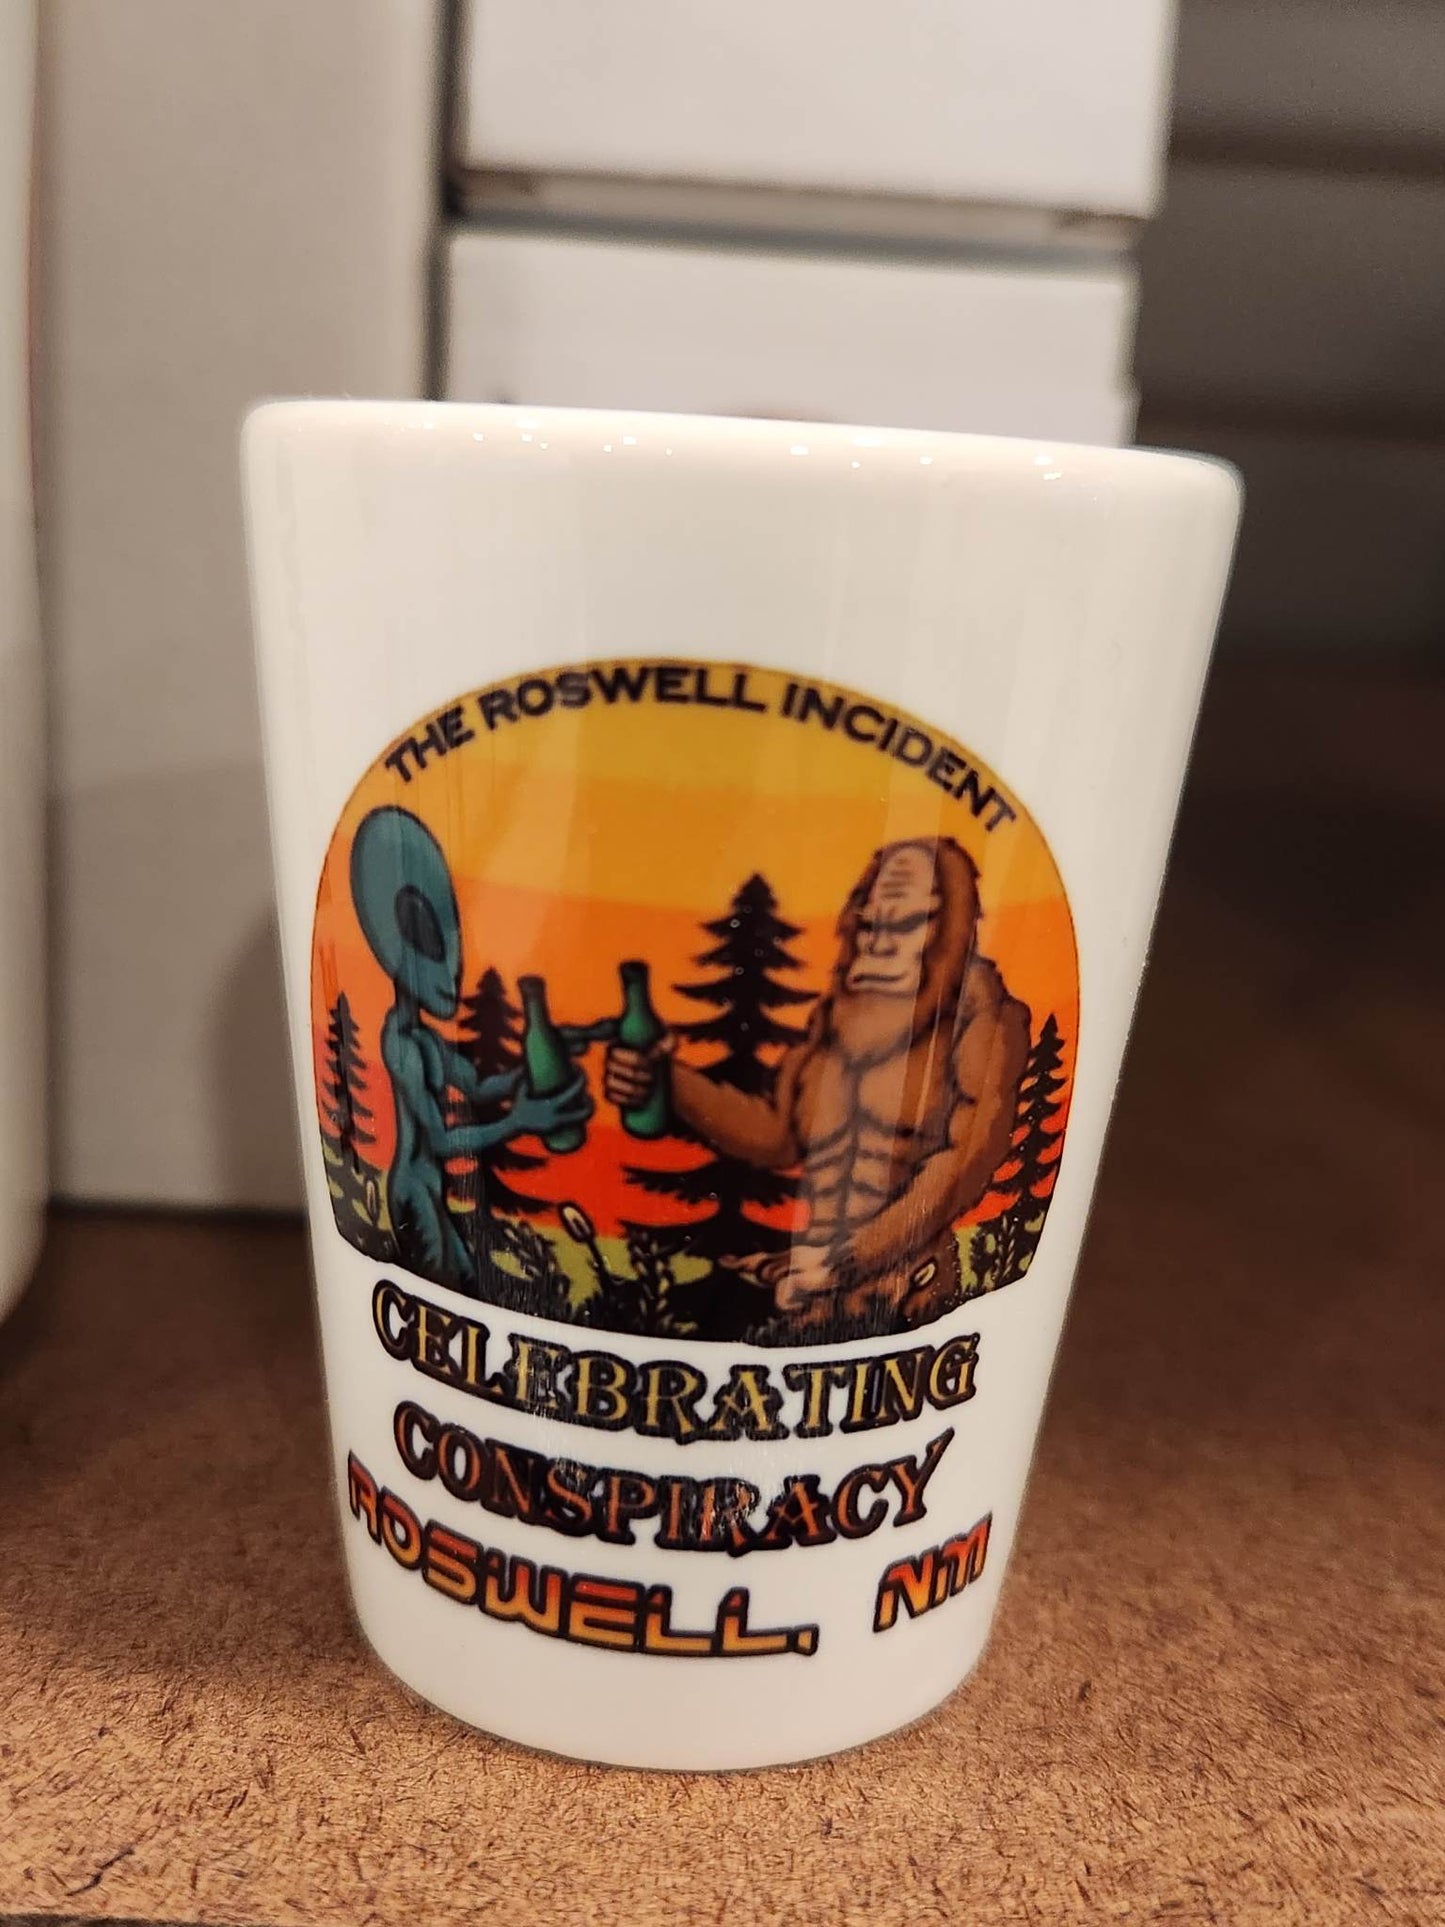 Celebrating Conspiracy - The Roswell Incident Alien Bigfoot 1.5oz Shot Glass